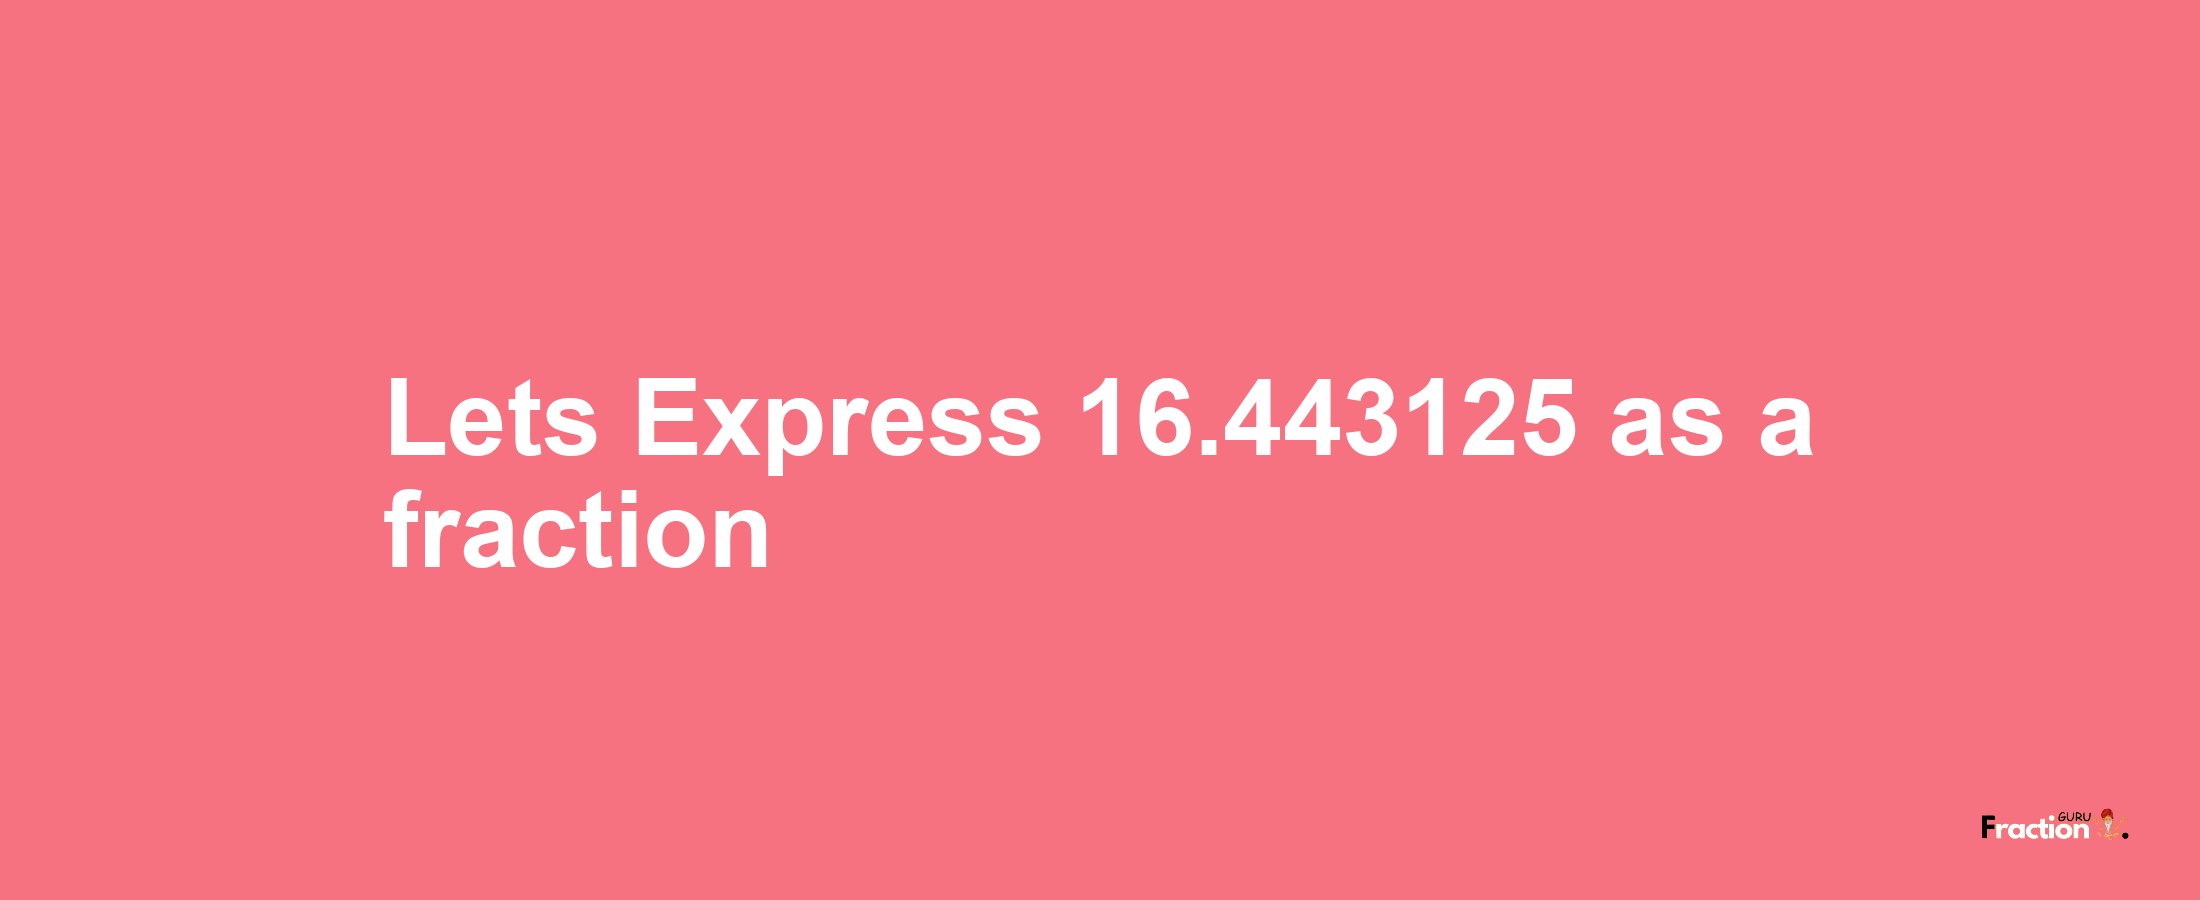 Lets Express 16.443125 as afraction